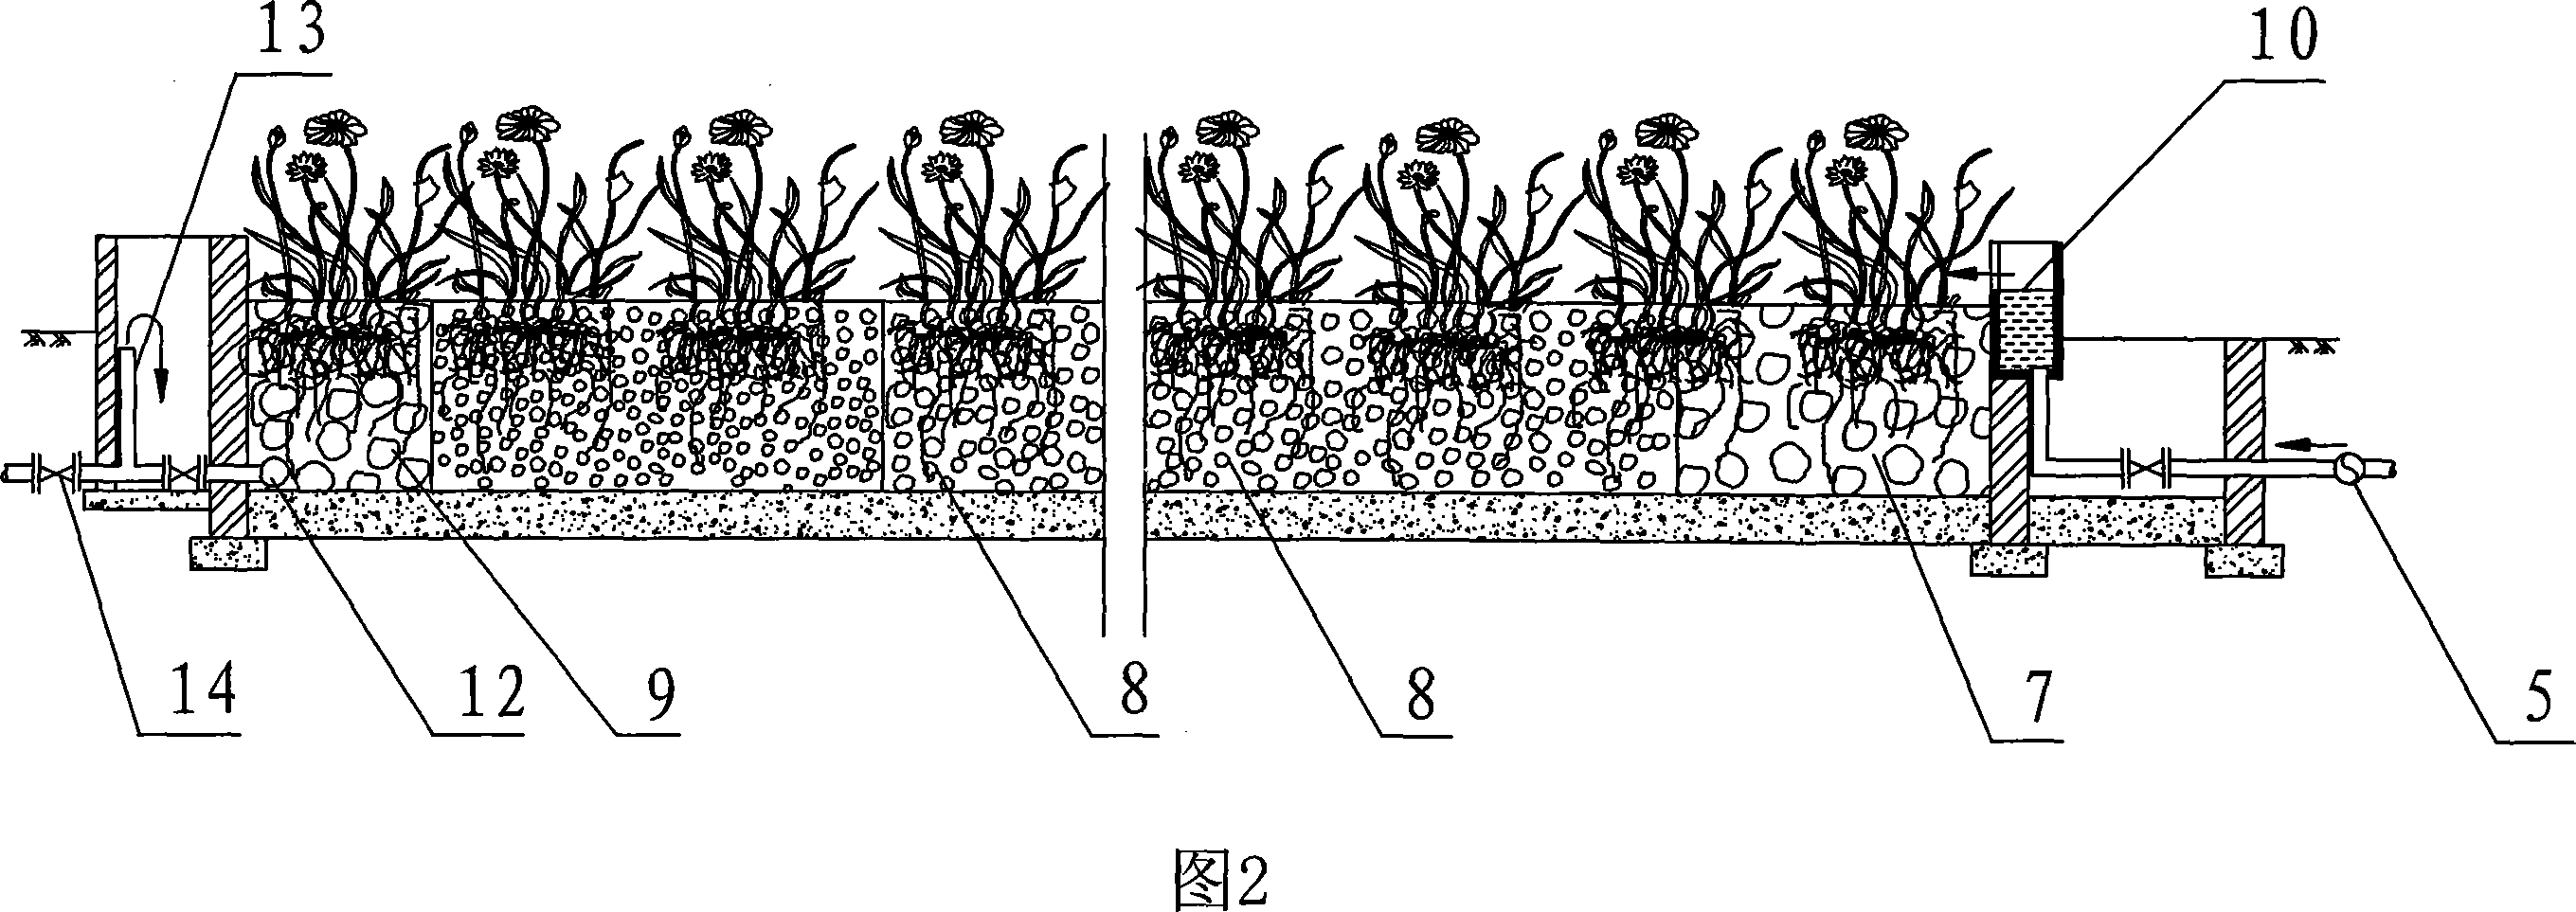 Pool culturing composite system with water-saving and safety function